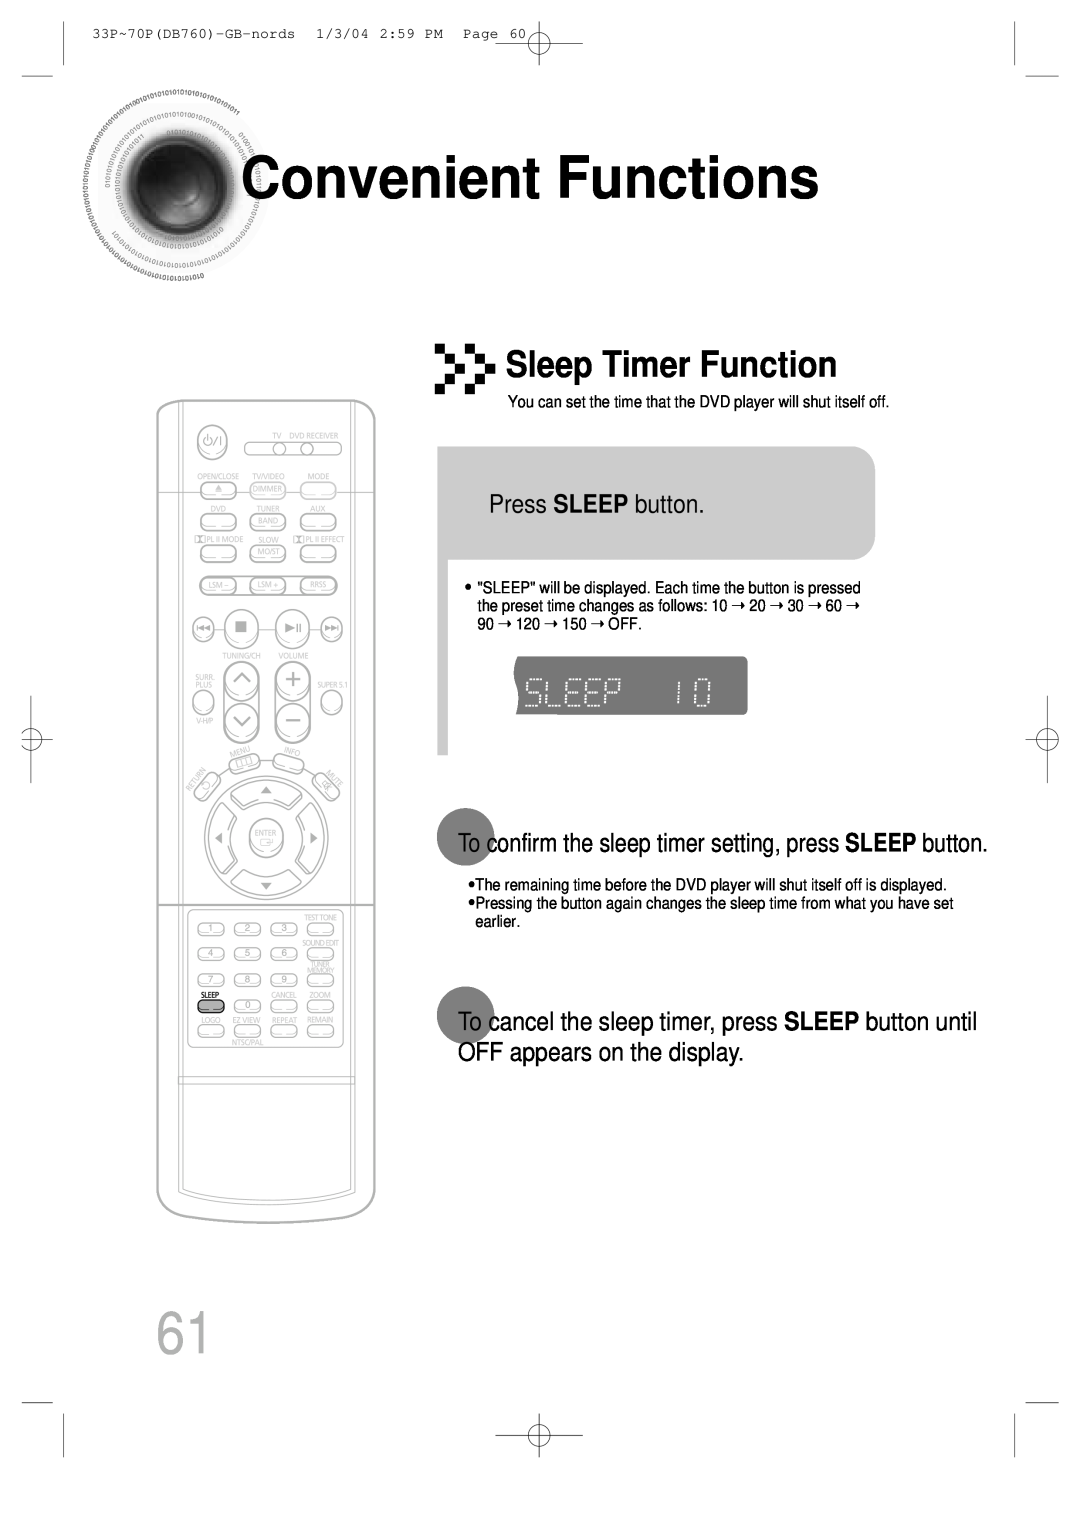 Samsung HTDB760TH/UMG manual ConvenientFunctions, Sleep Timer Function, Press SLEEP button, OFF appears on the display 